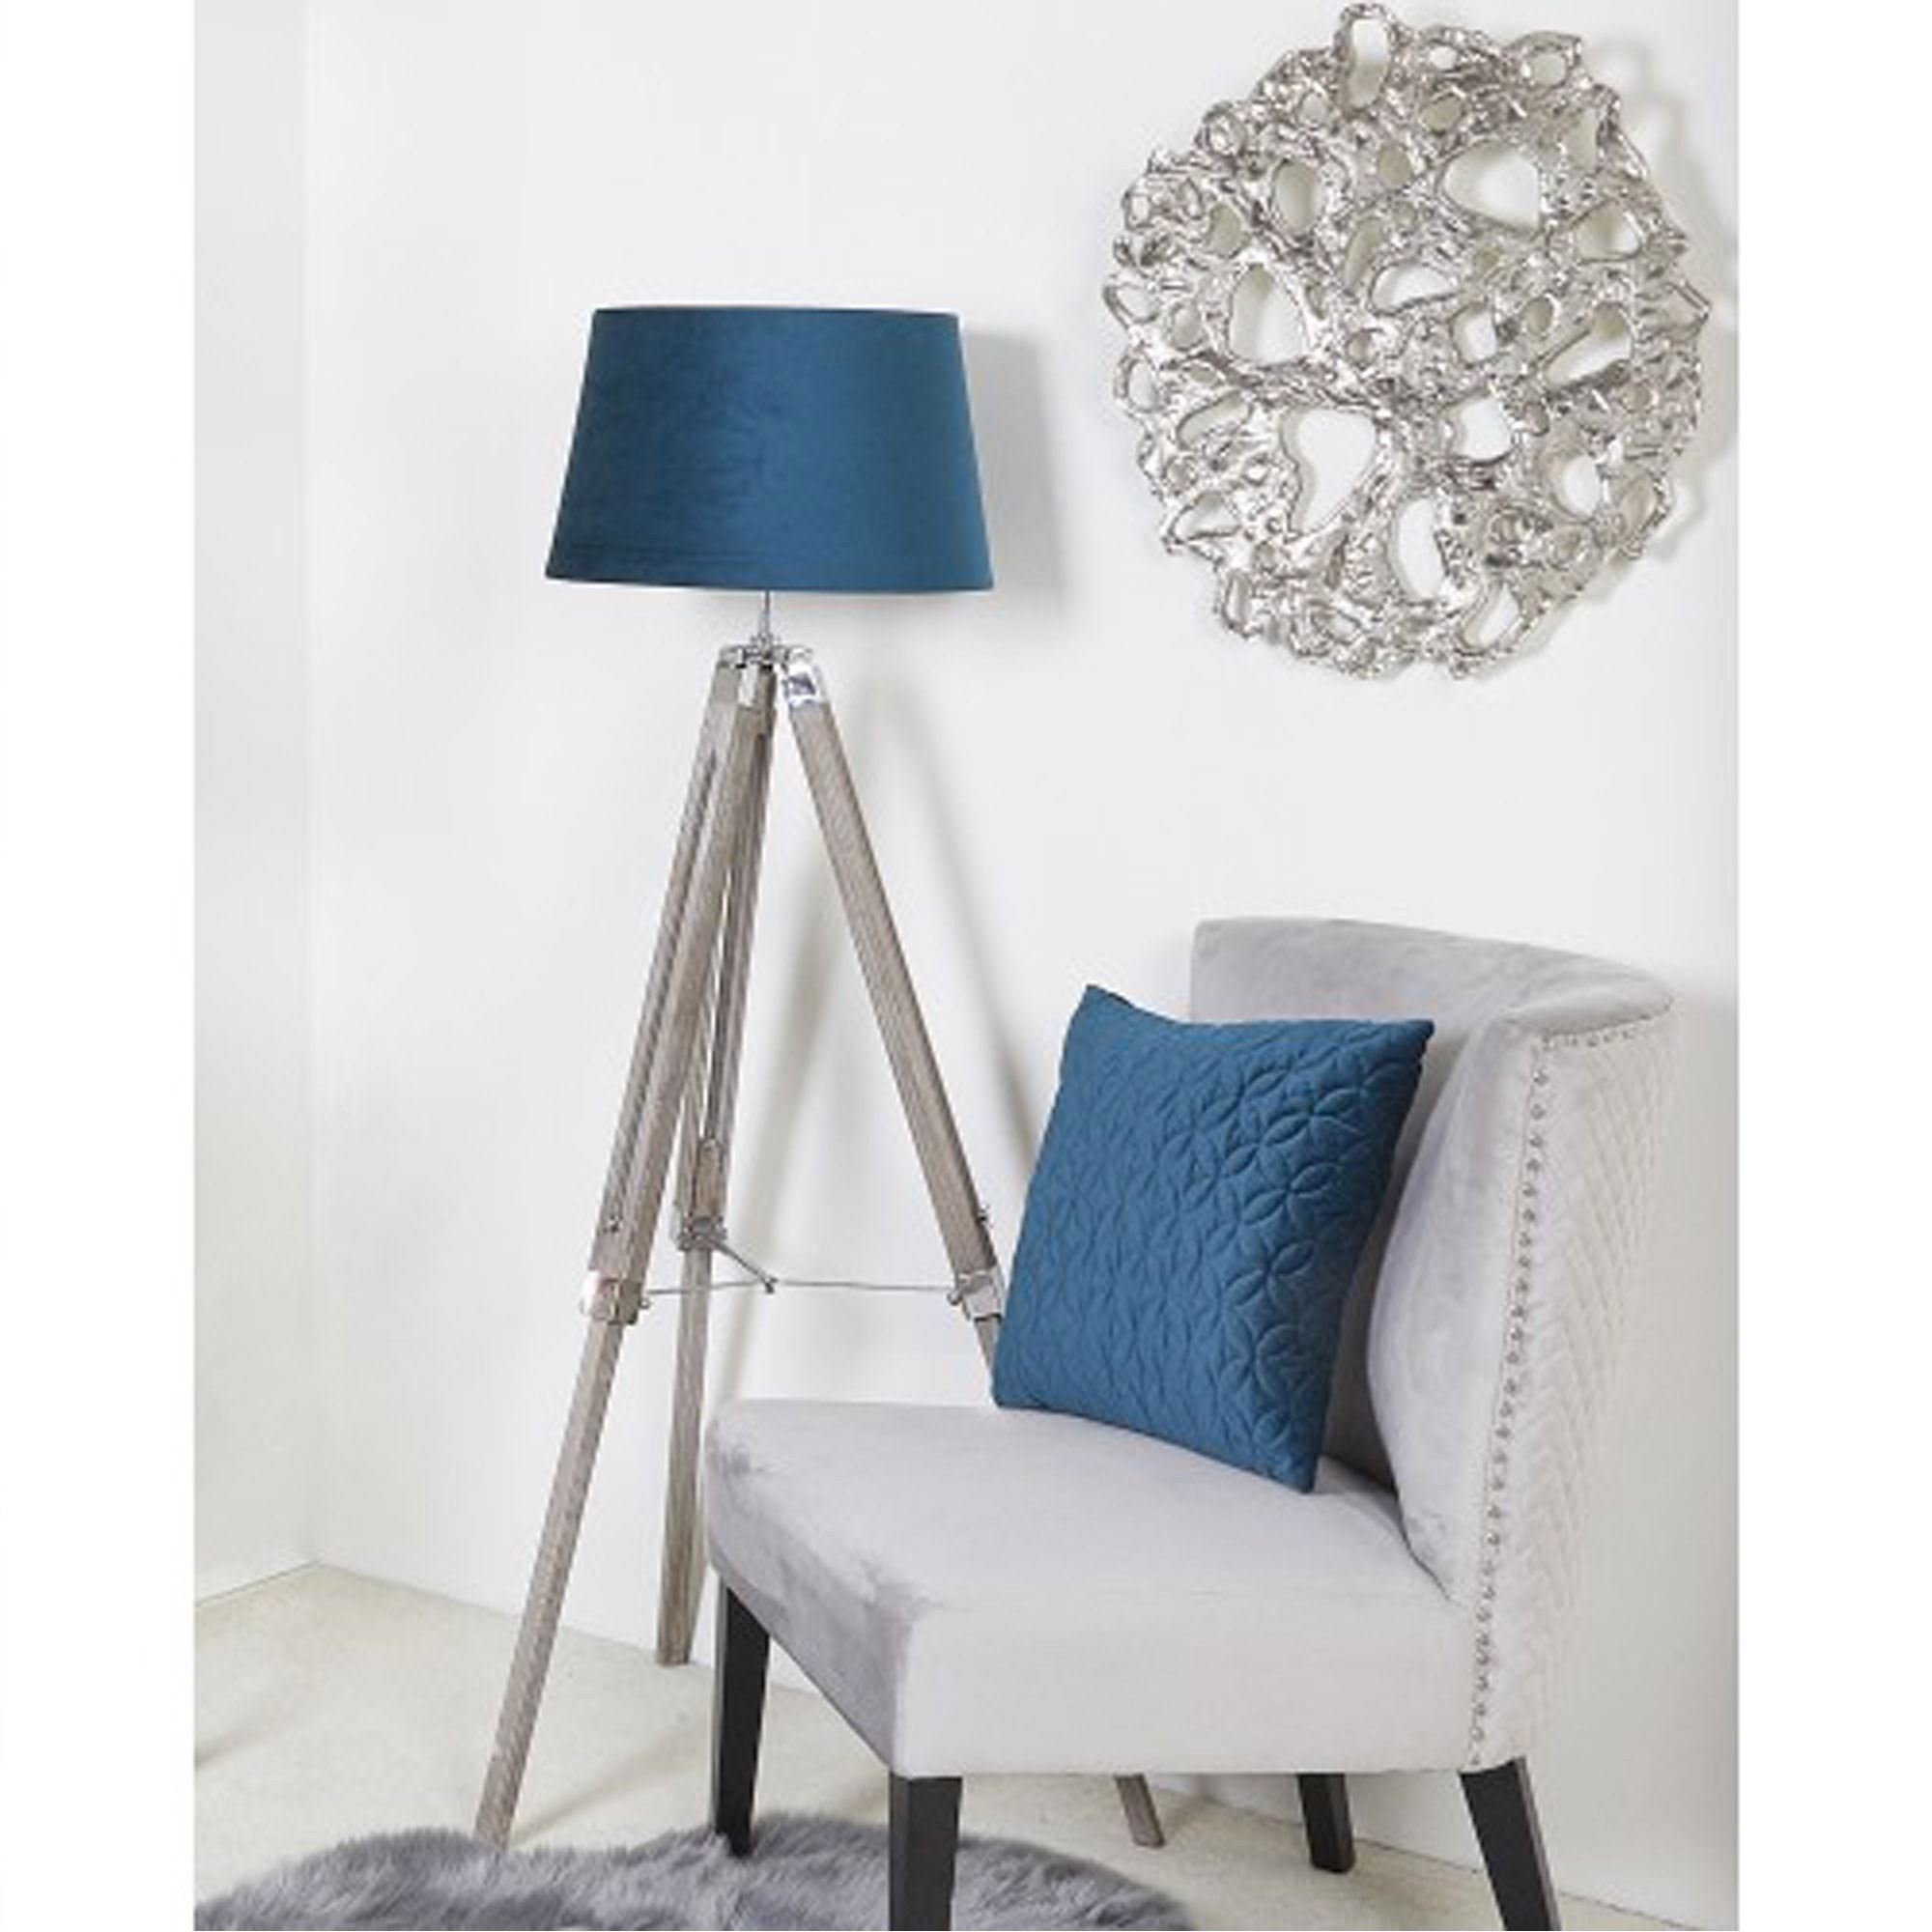 Wood Tripod Floor Lamp With Blue Shade | Floor Standing Lamps Inside Blue Floor Lamps (View 9 of 20)